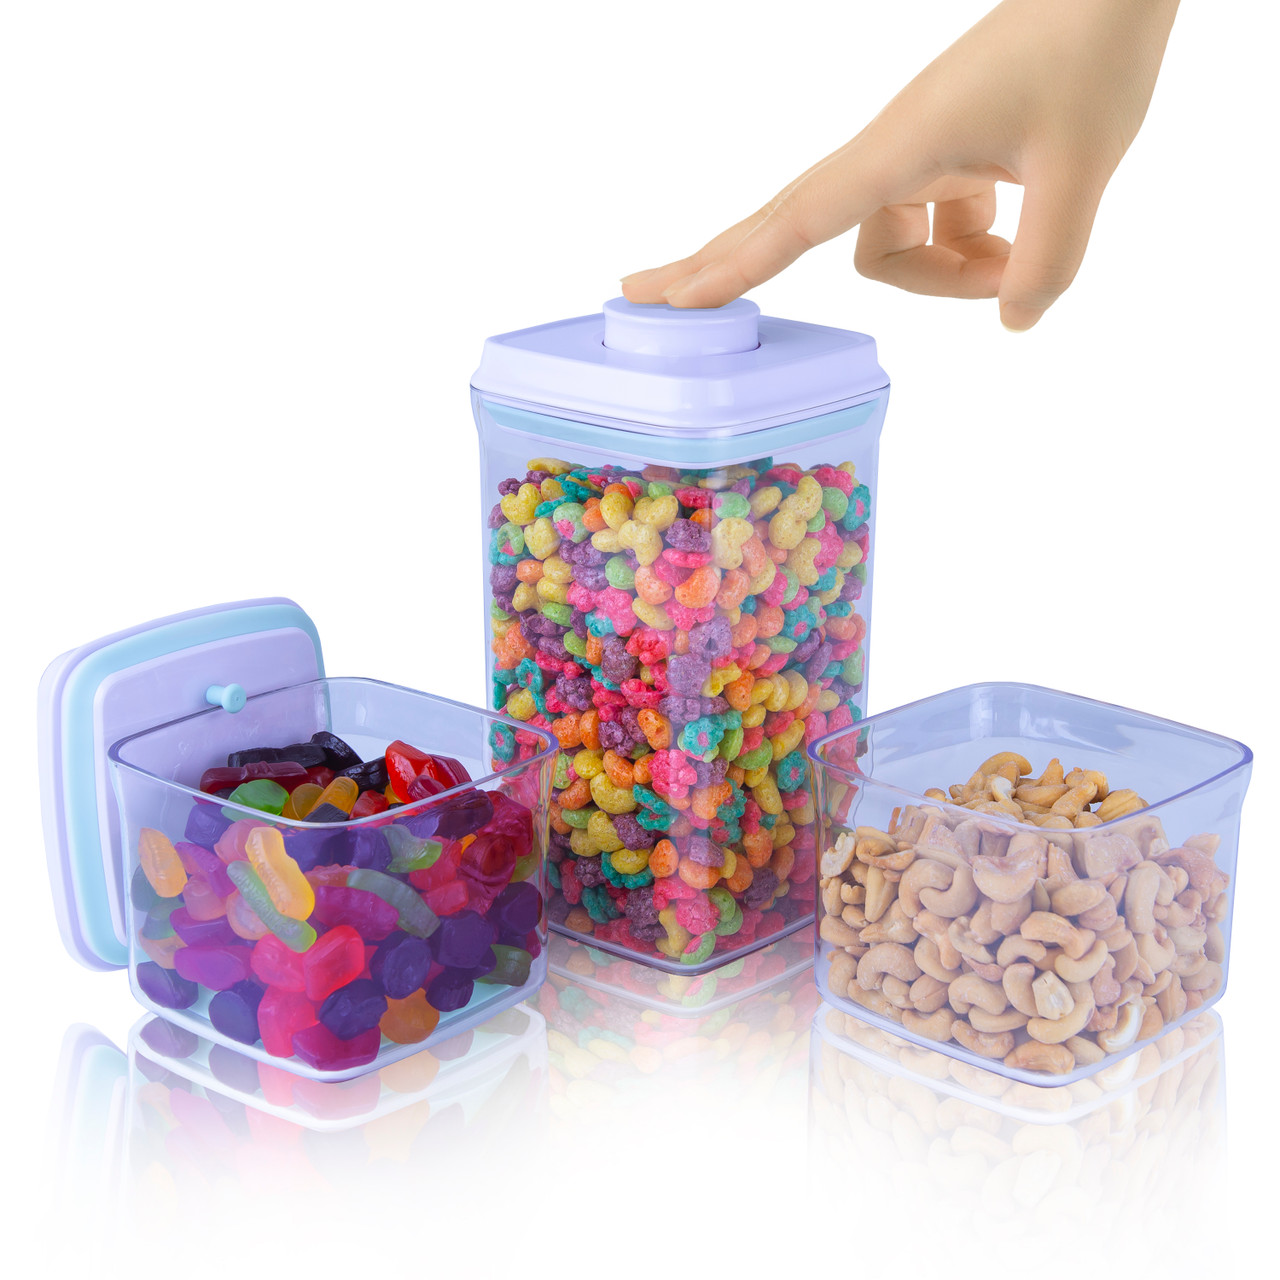 Silicone Food Storage Containers with Airtight Plastic Lids Set of